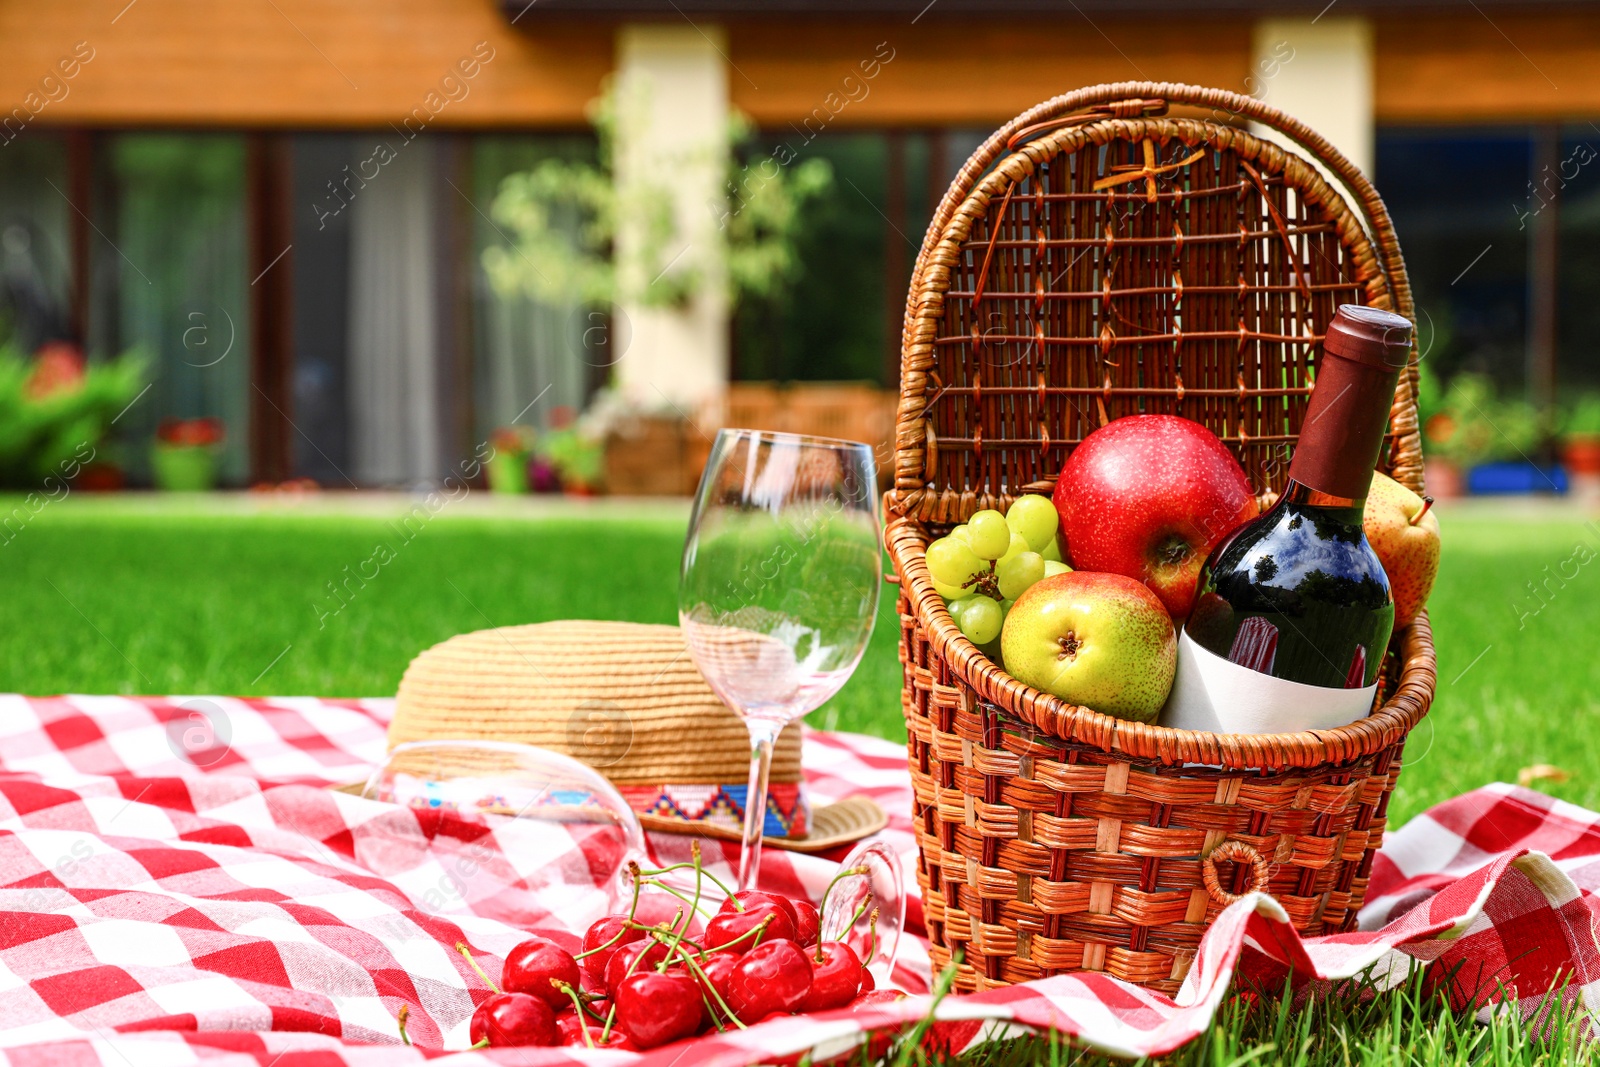 Photo of Picnic basket with fruits and bottle of wine on checkered blanket in garden